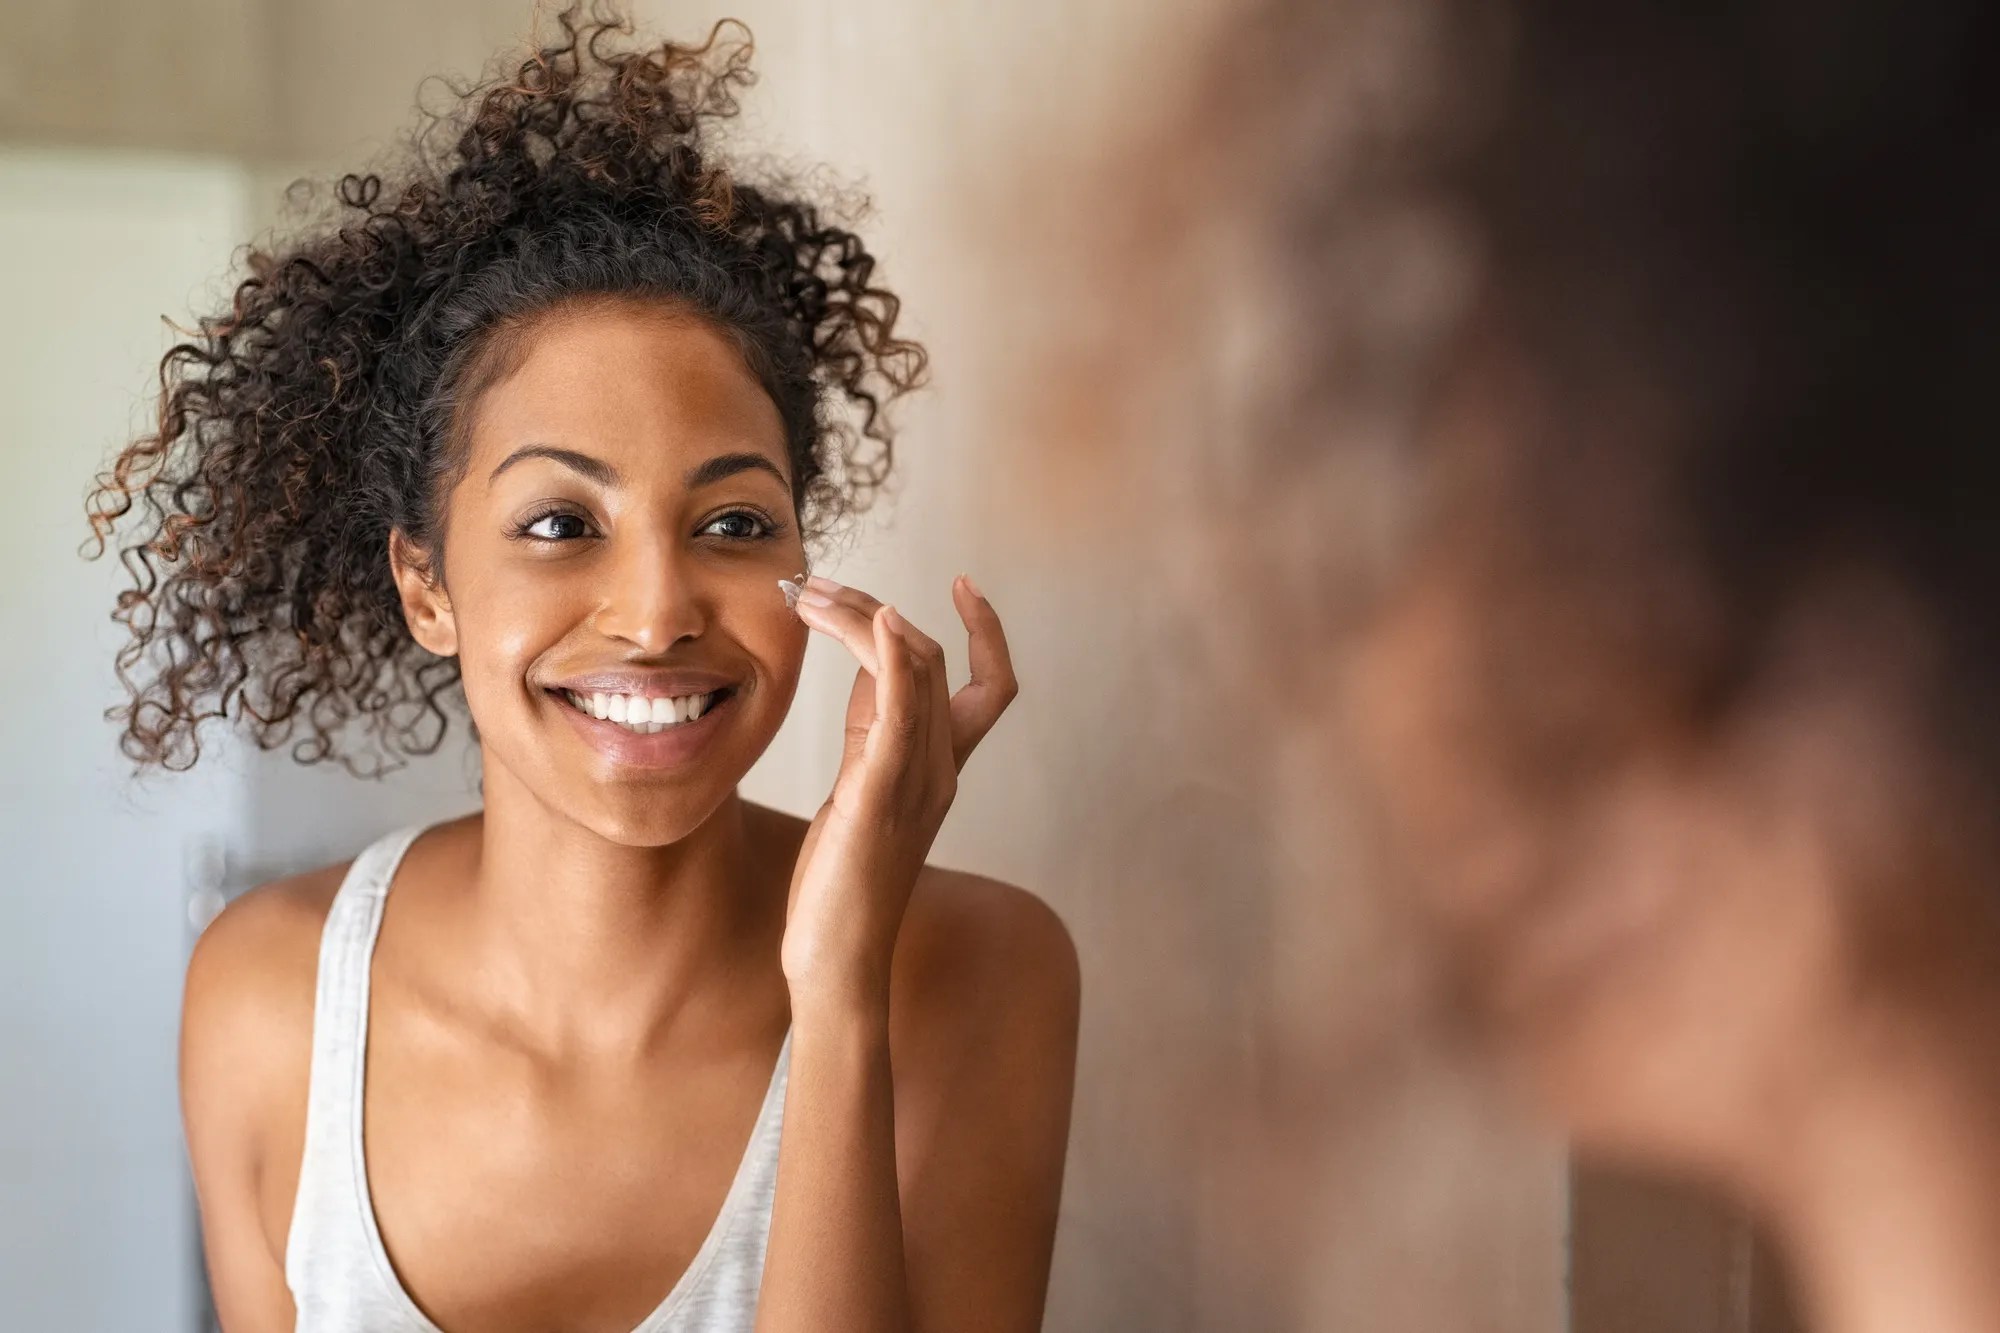 5 Common Skincare Myths Busted